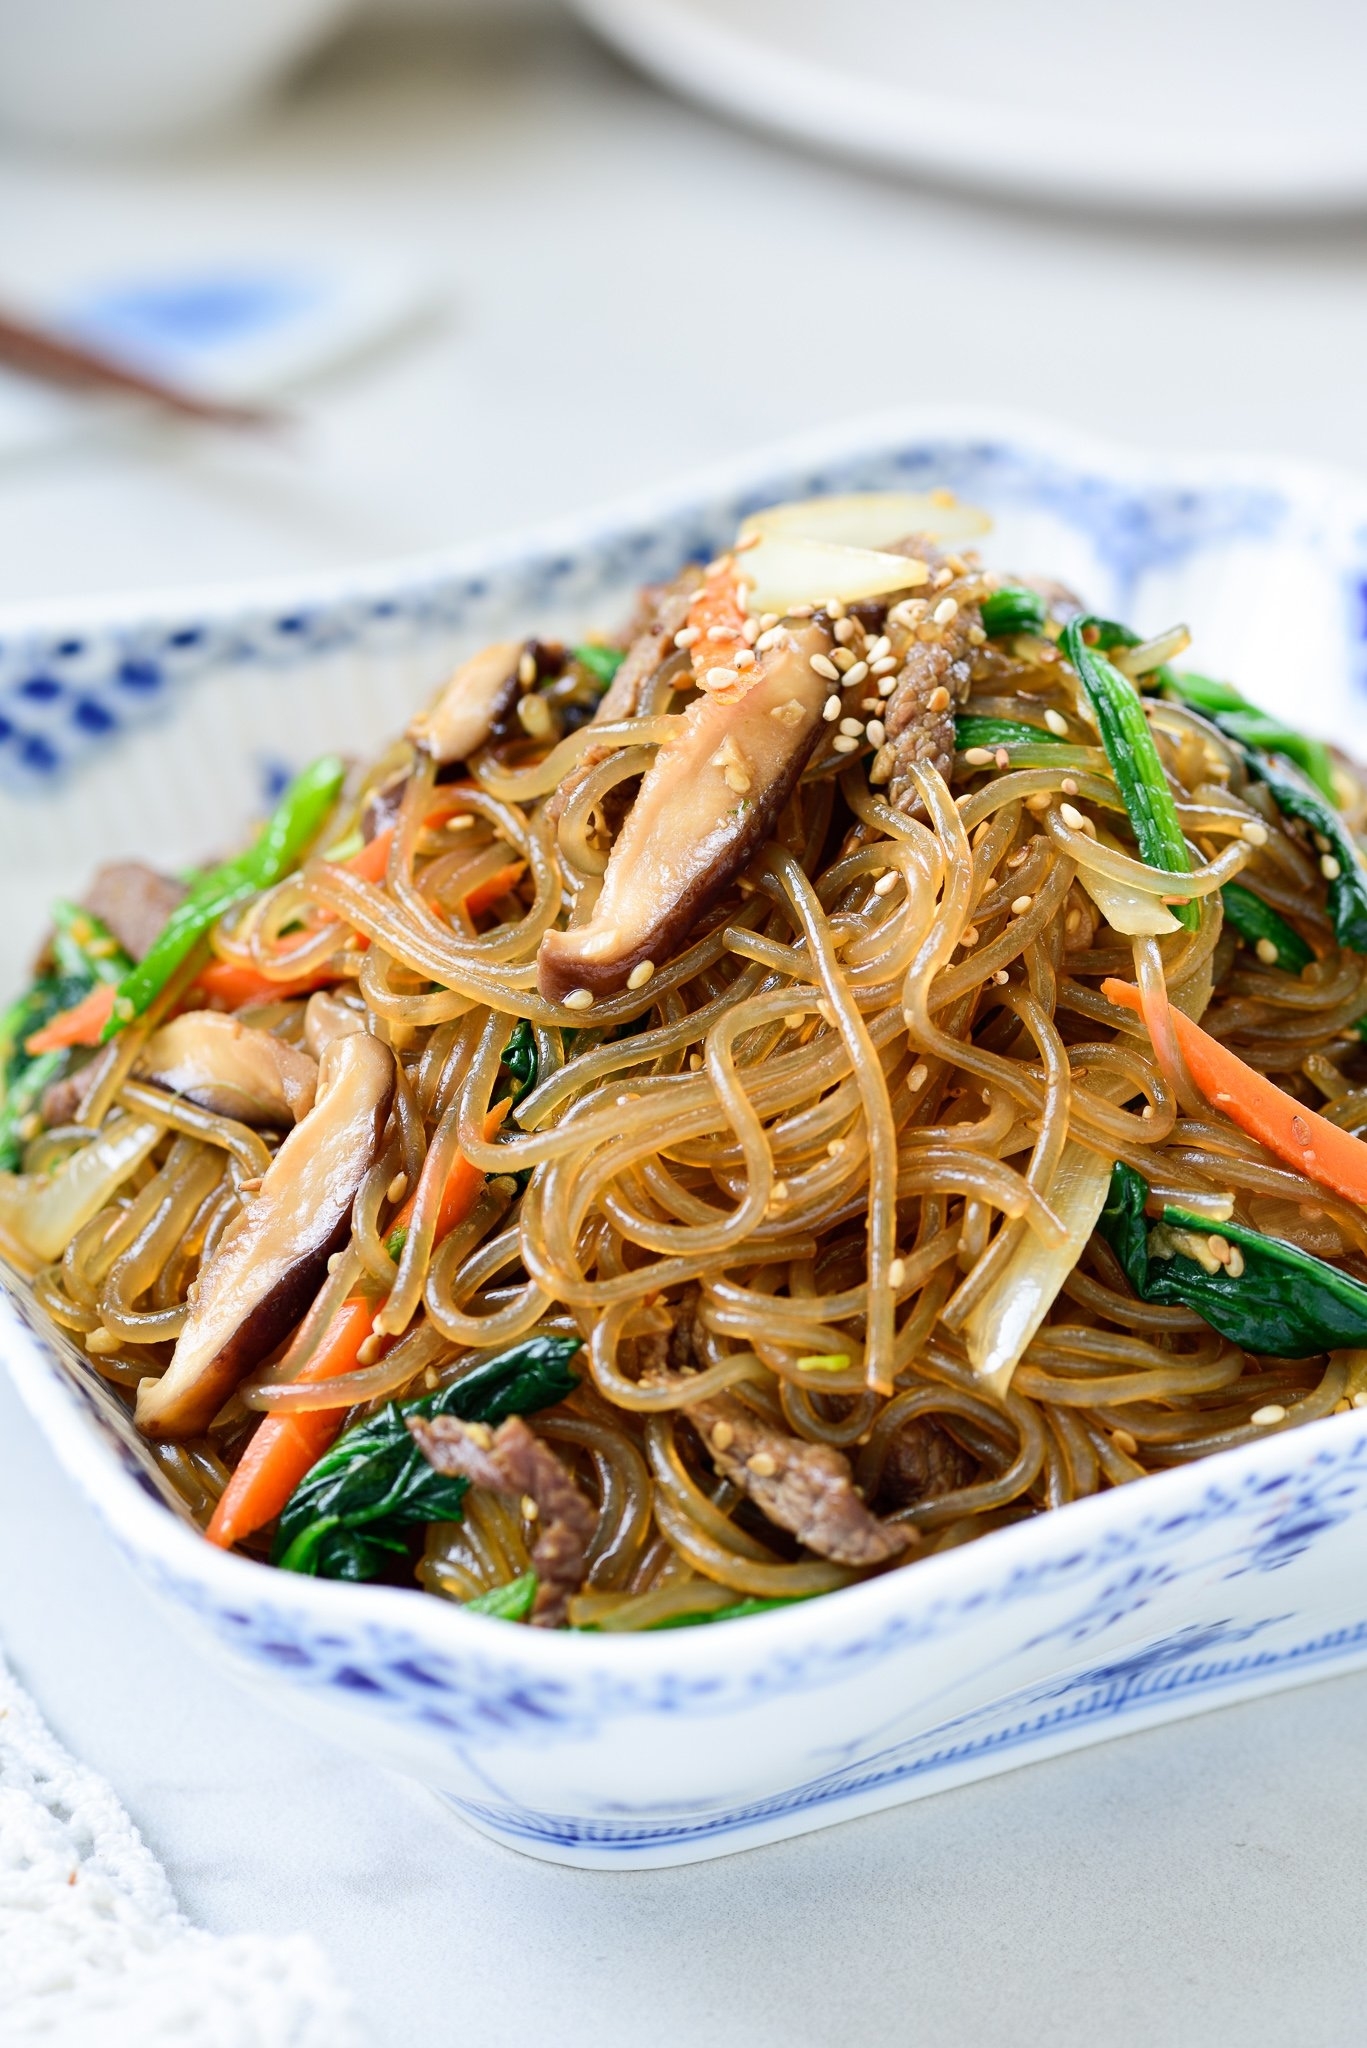 Bowl of stir-fried glass noodles with vegetables and meat, garnished with sesame seeds